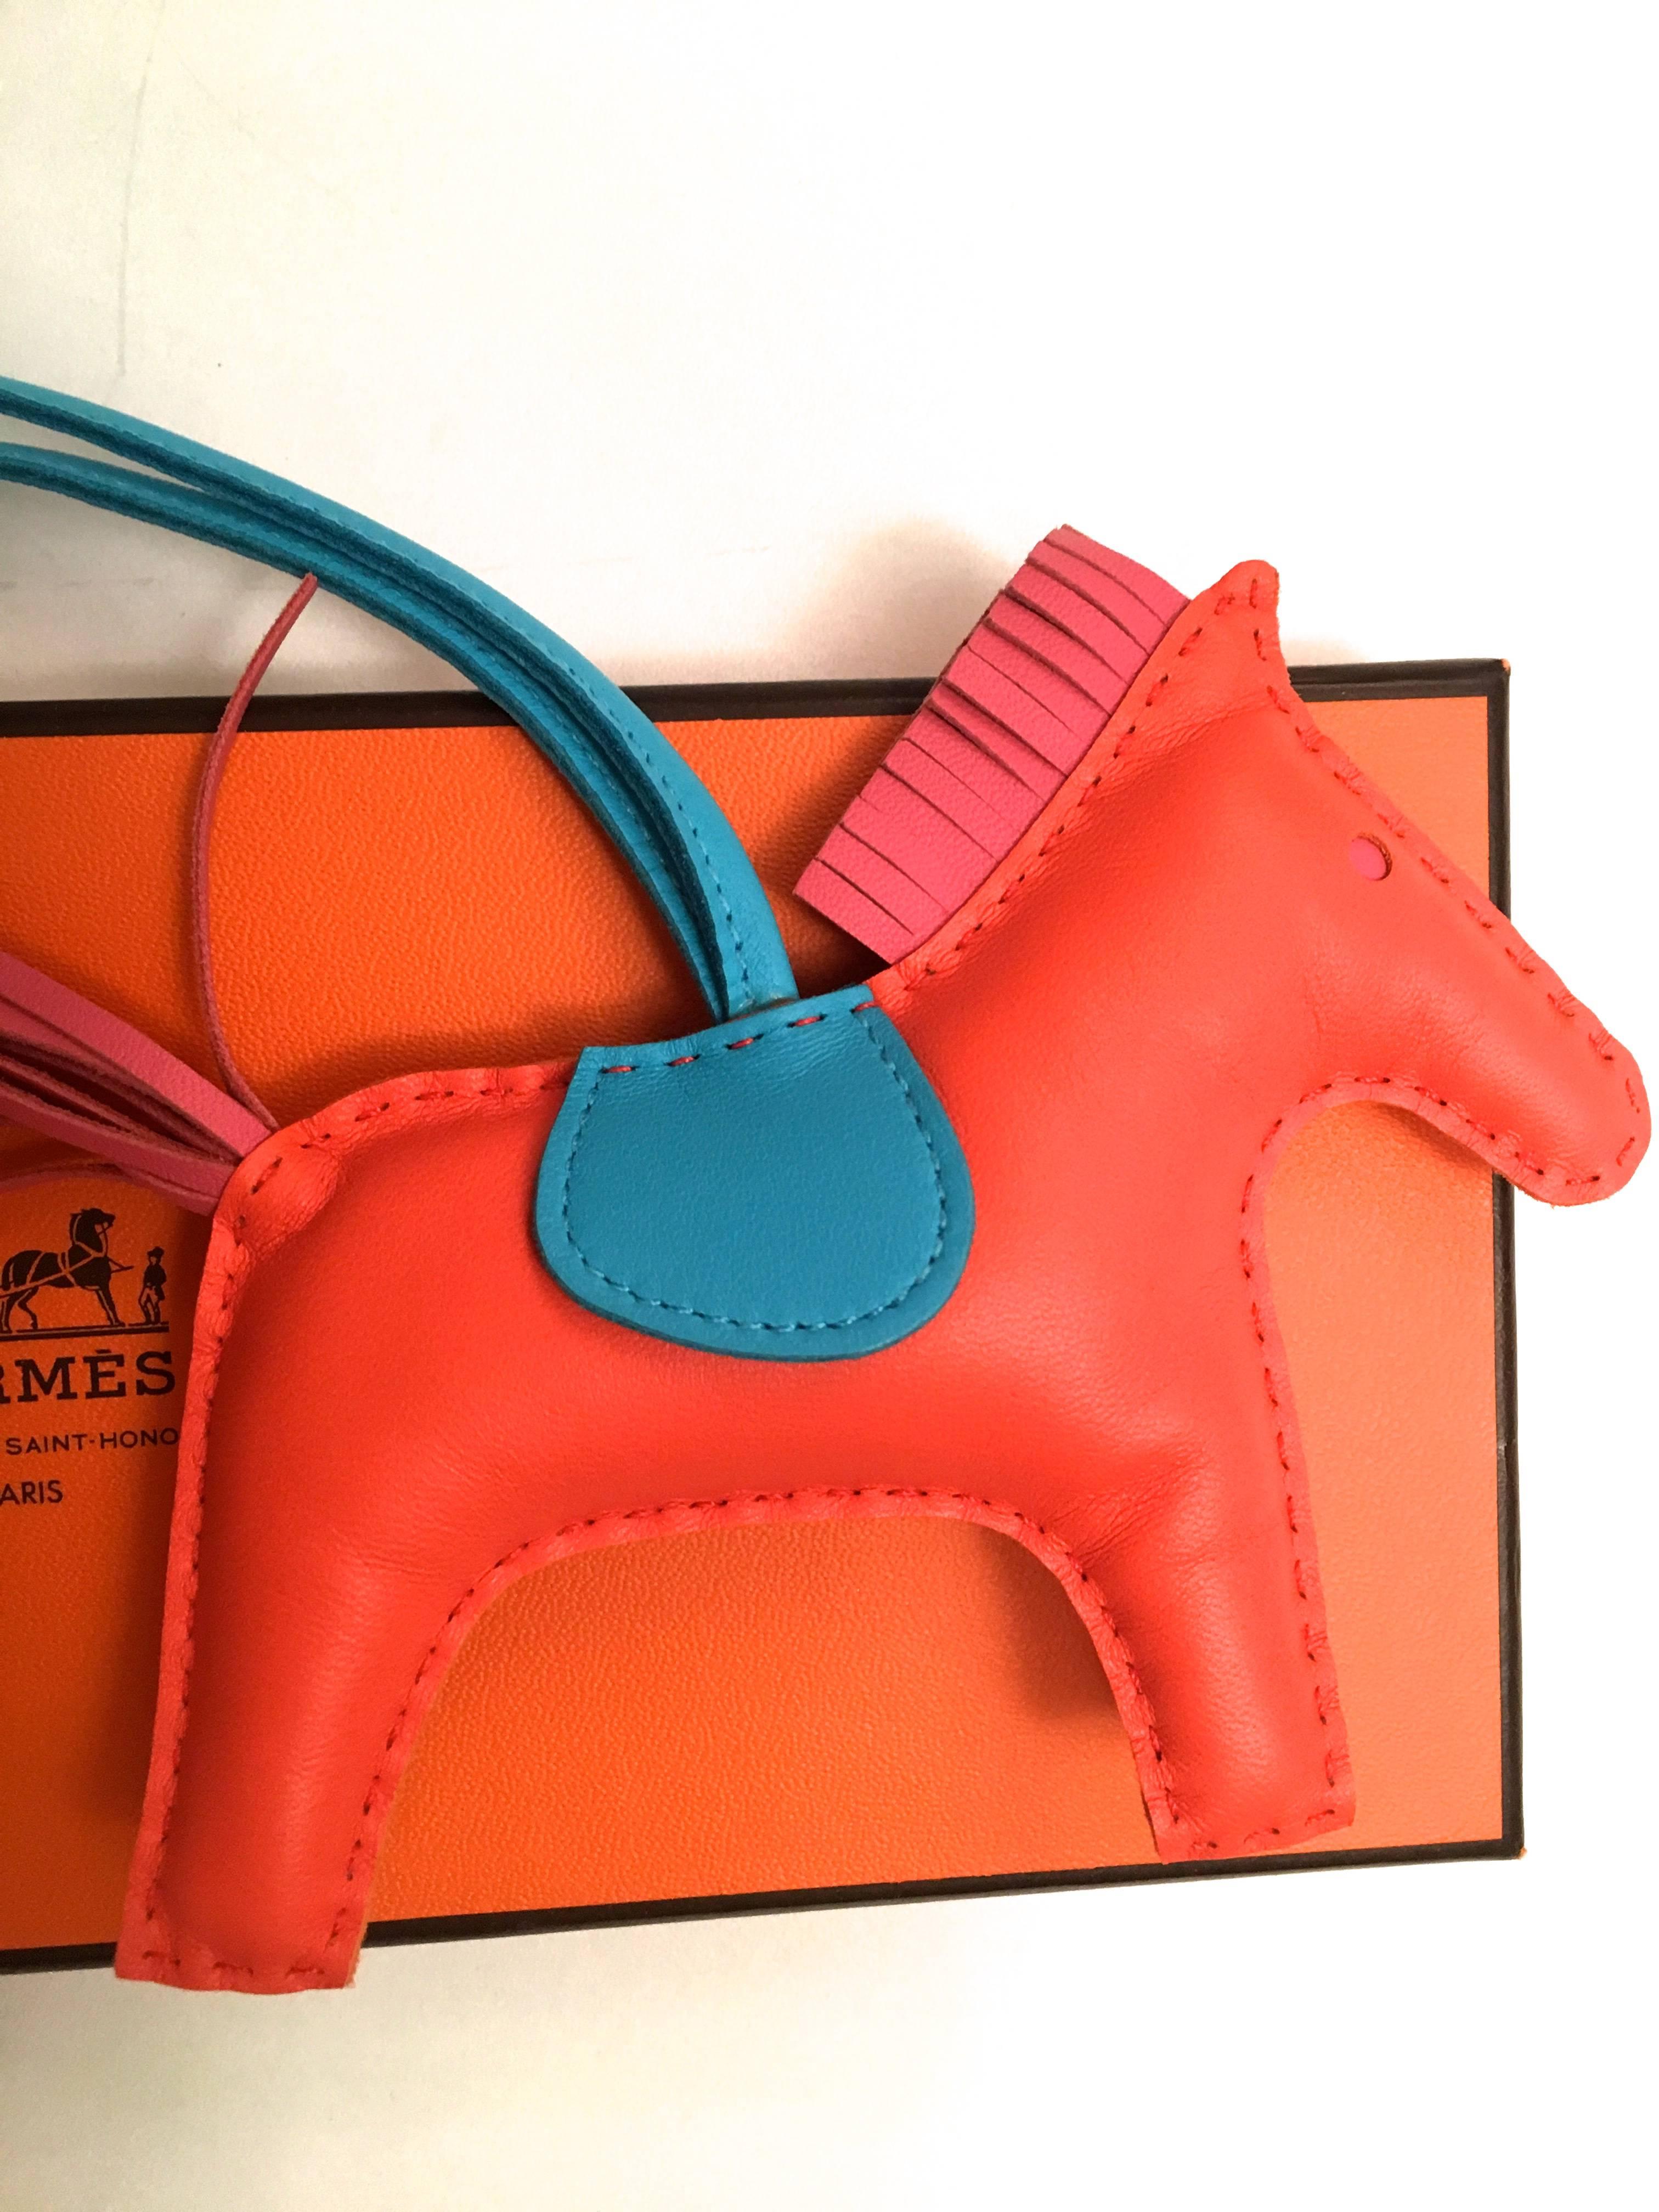 Presented here is a beautiful bag charm from Hermes Paris. This beautiful bag charm is made from butter soft smooth leather. In the Hermes color pallet, the colors of the charm are orange poppy for the main body of the horse, rose azalea for the